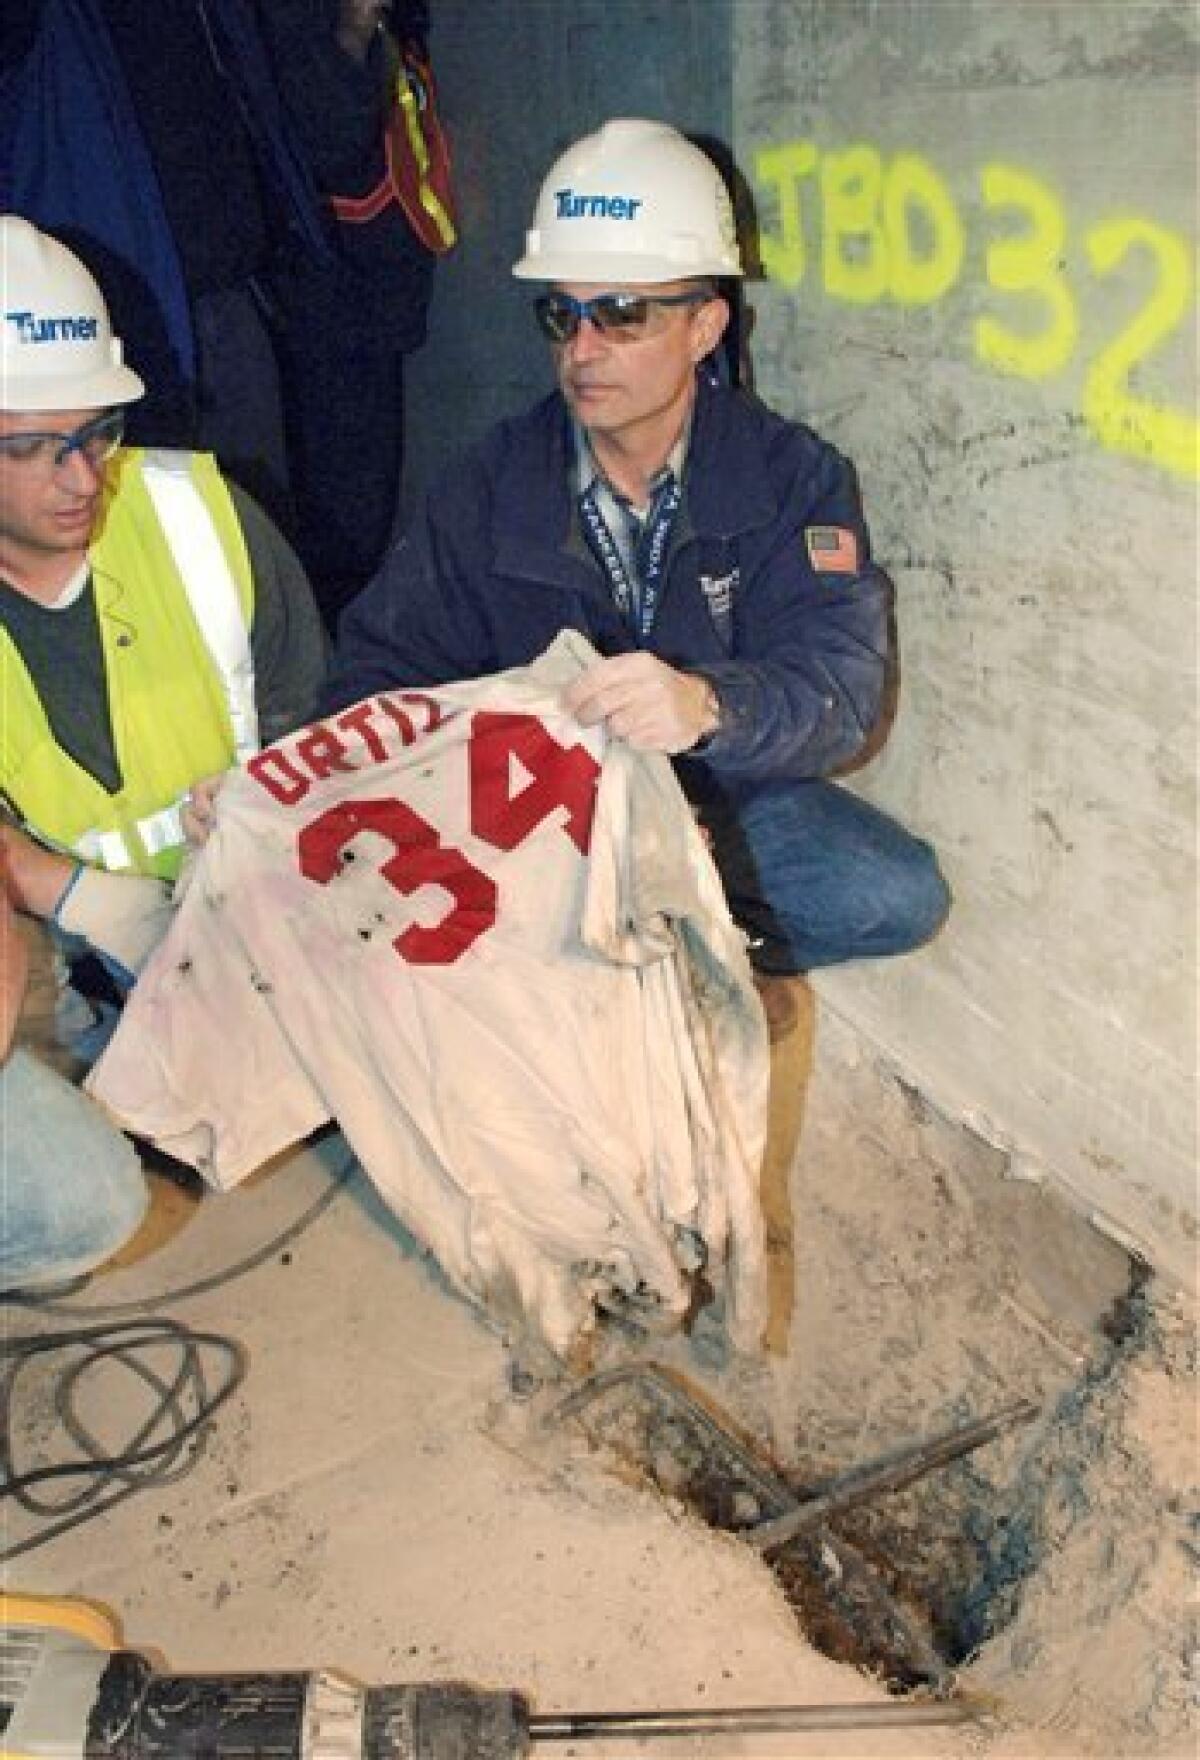 Workers unearth buried jersey, Local Sports News